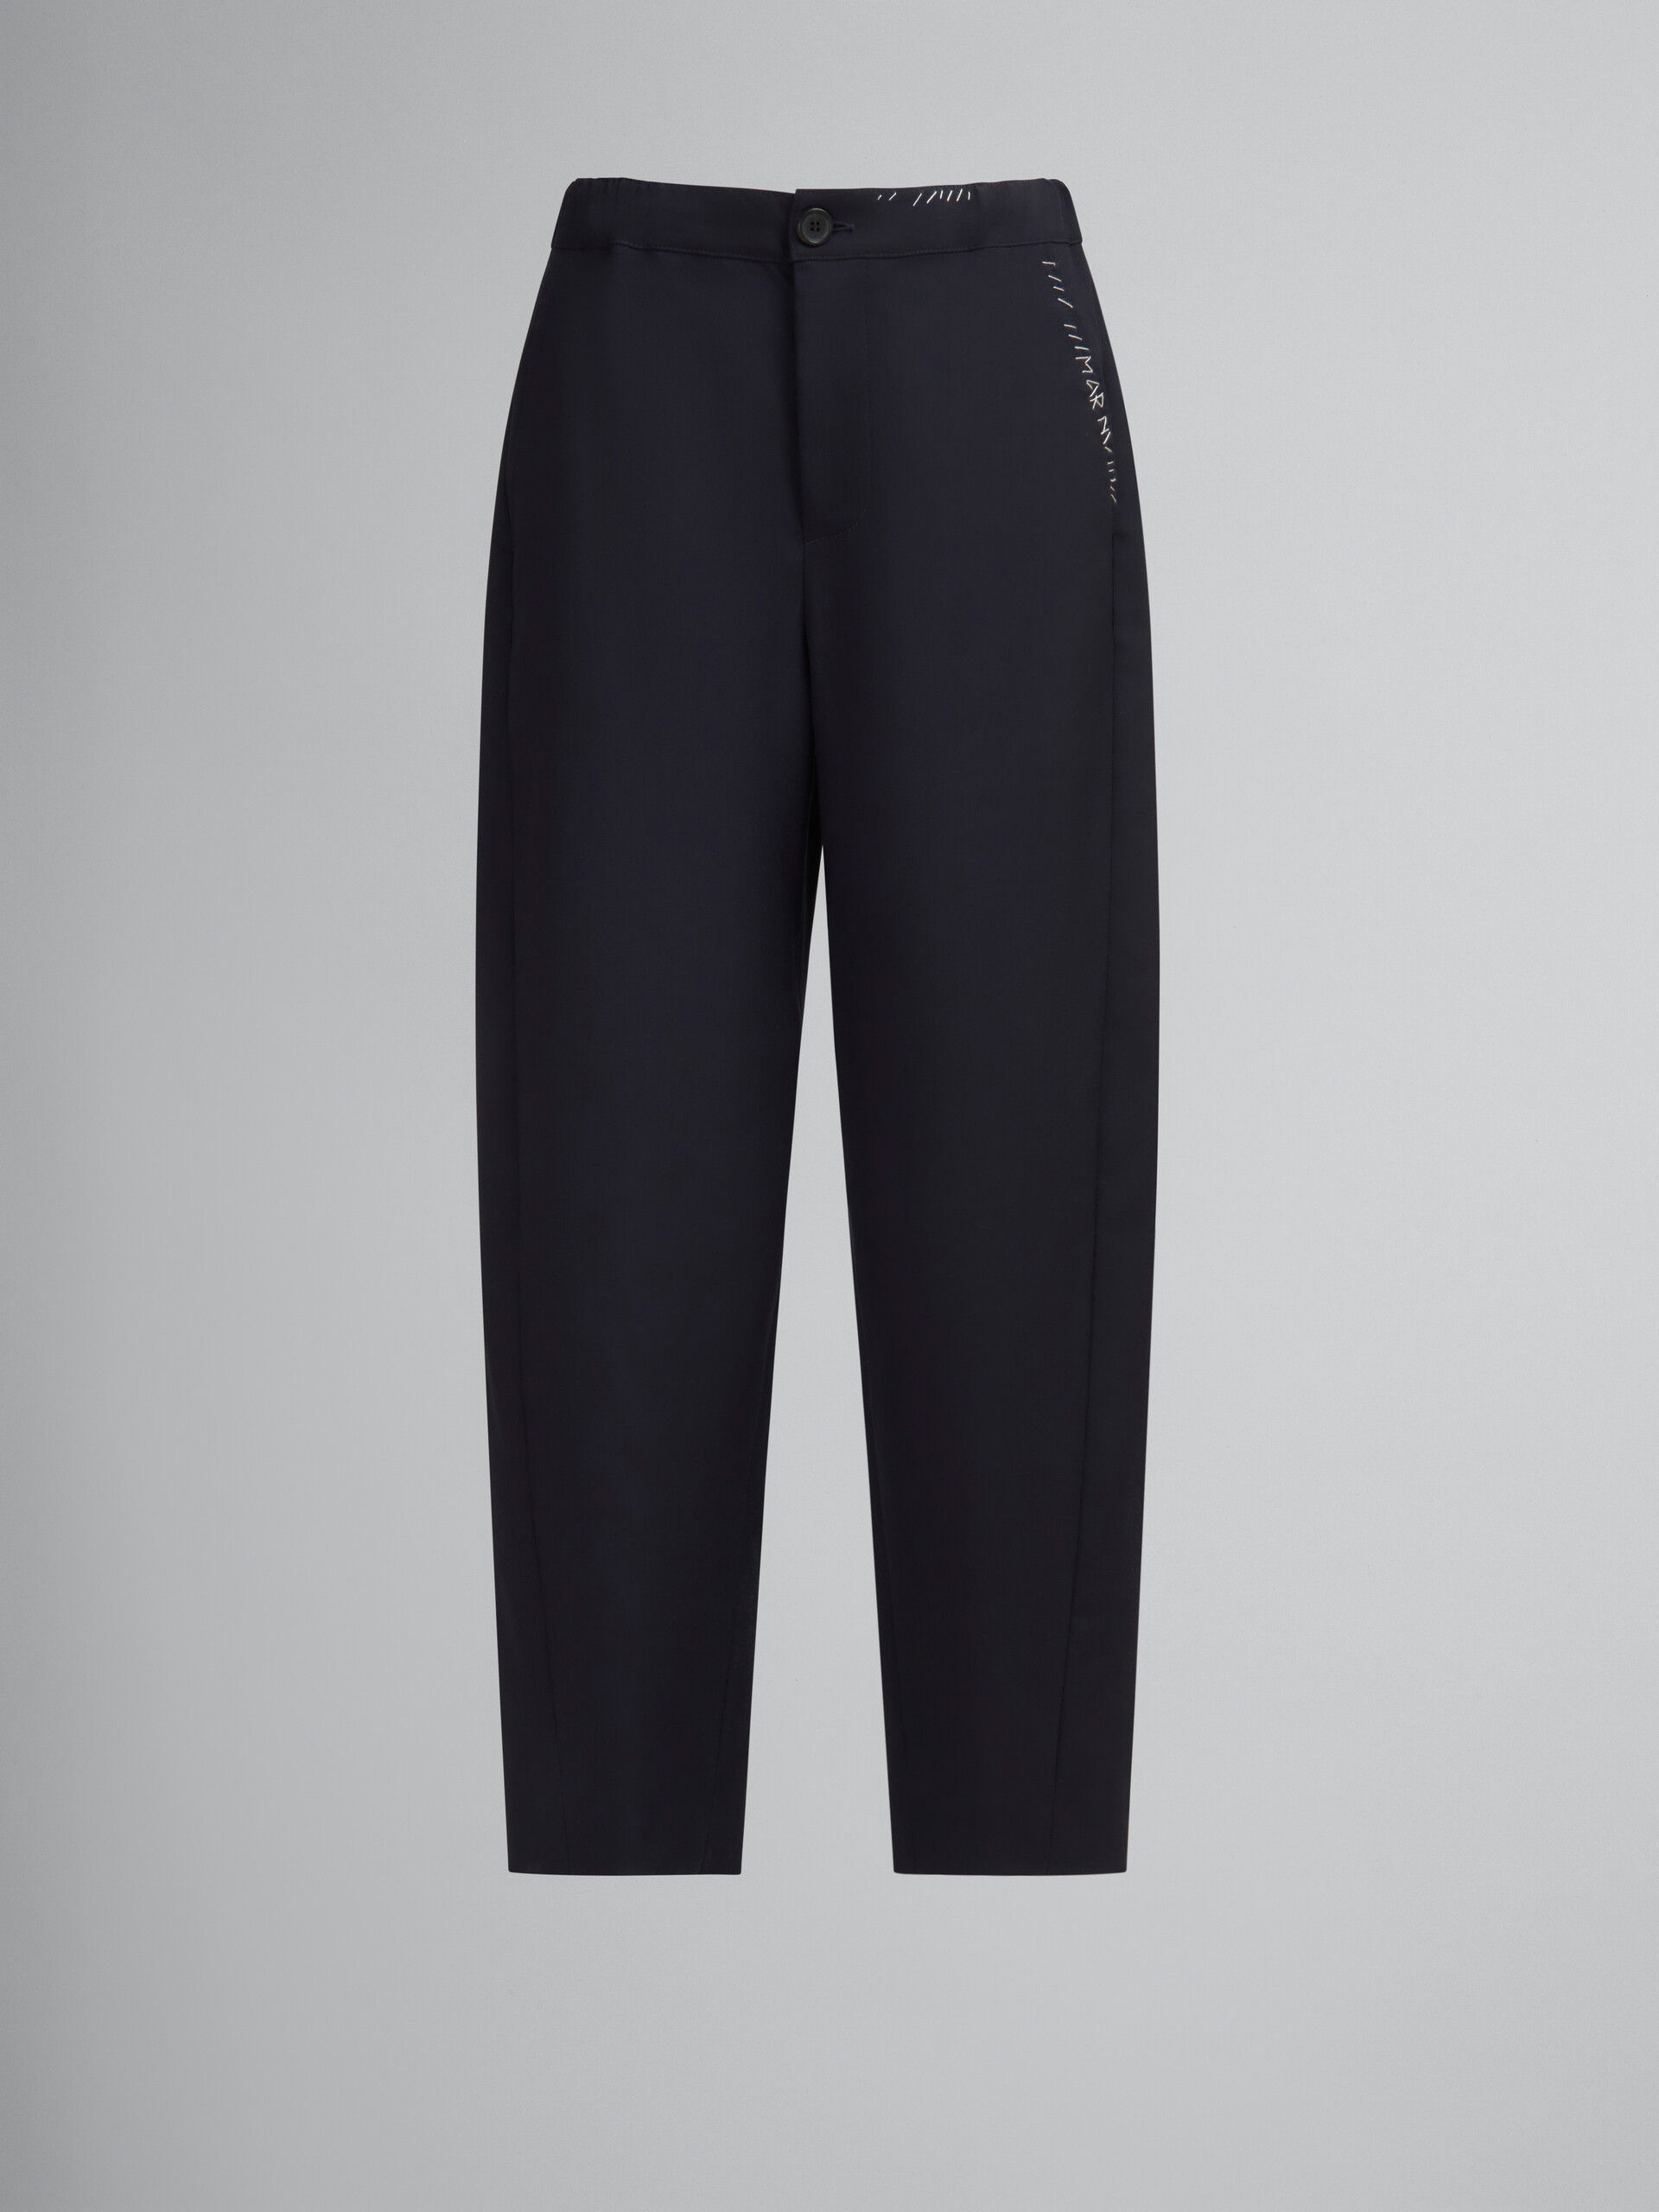 Deep blue tropical wool trousers with Marni mending - Pants - Image 1